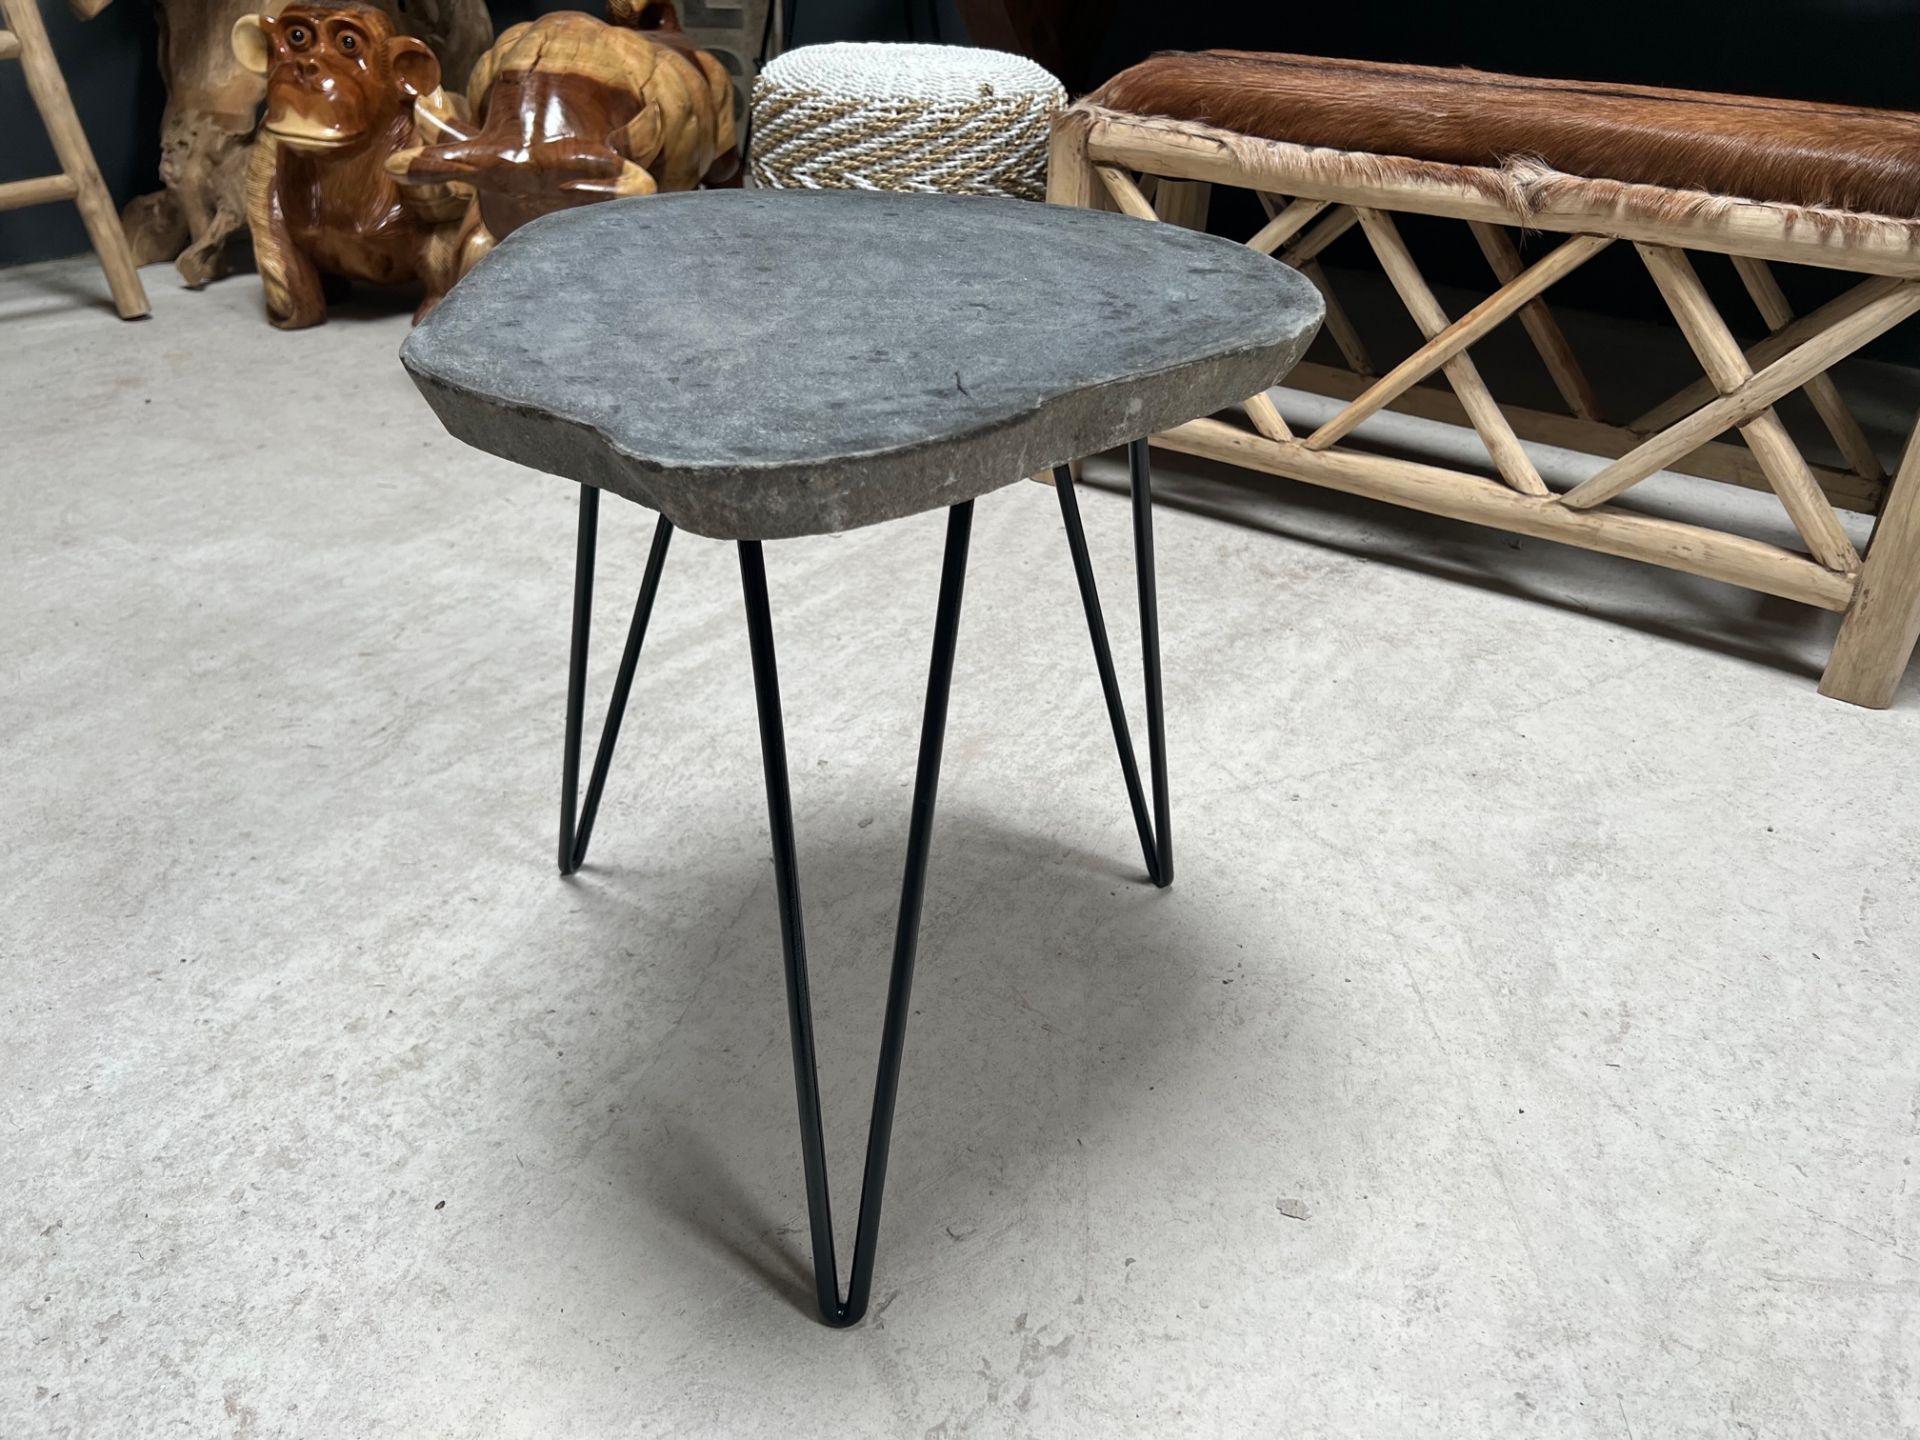 HEAVY STONE TABLE ON INDUSTRIAL LEGS - Image 3 of 3